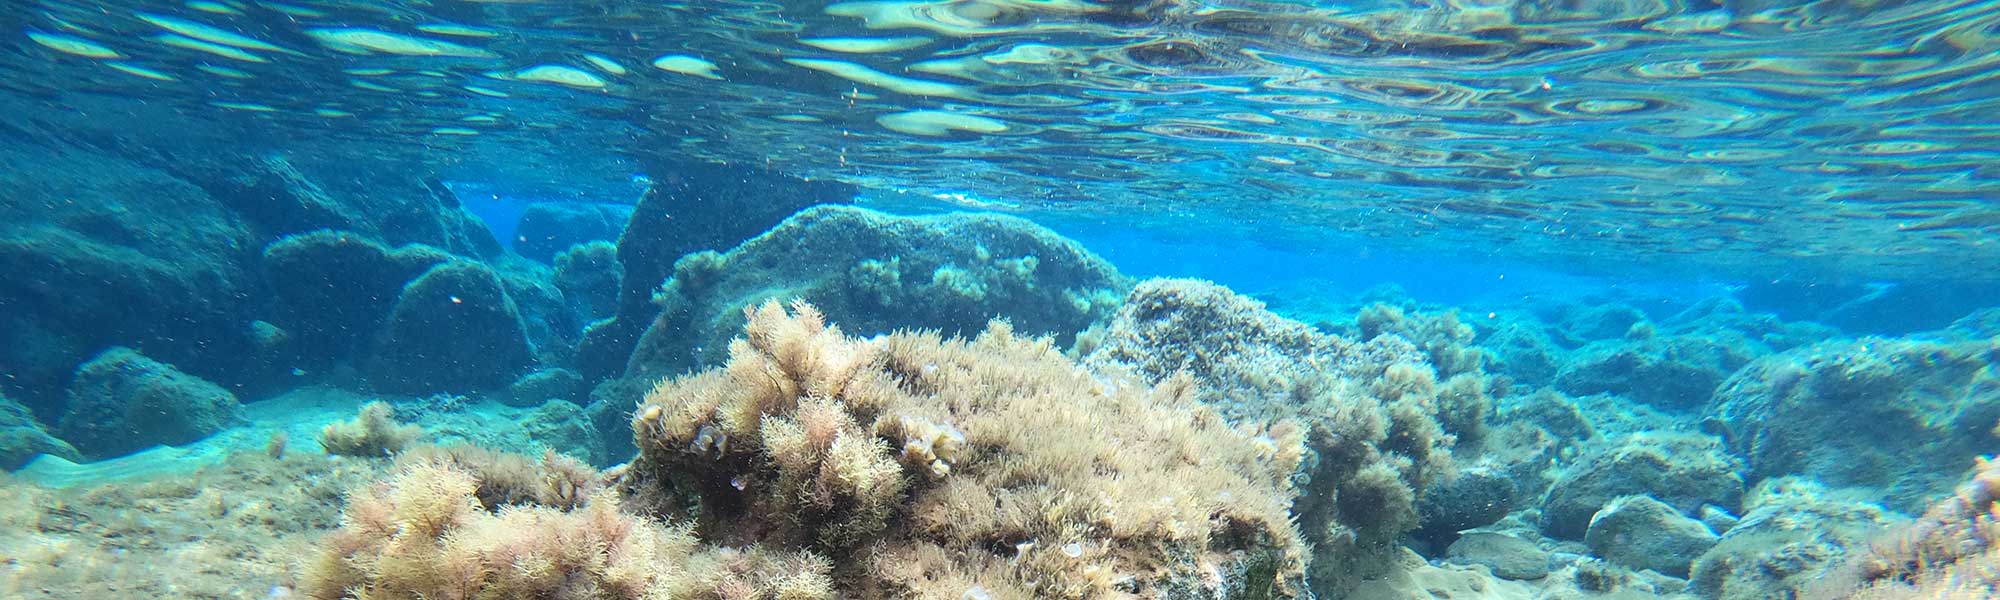 Seabed showing sea weed and sea surface from under water